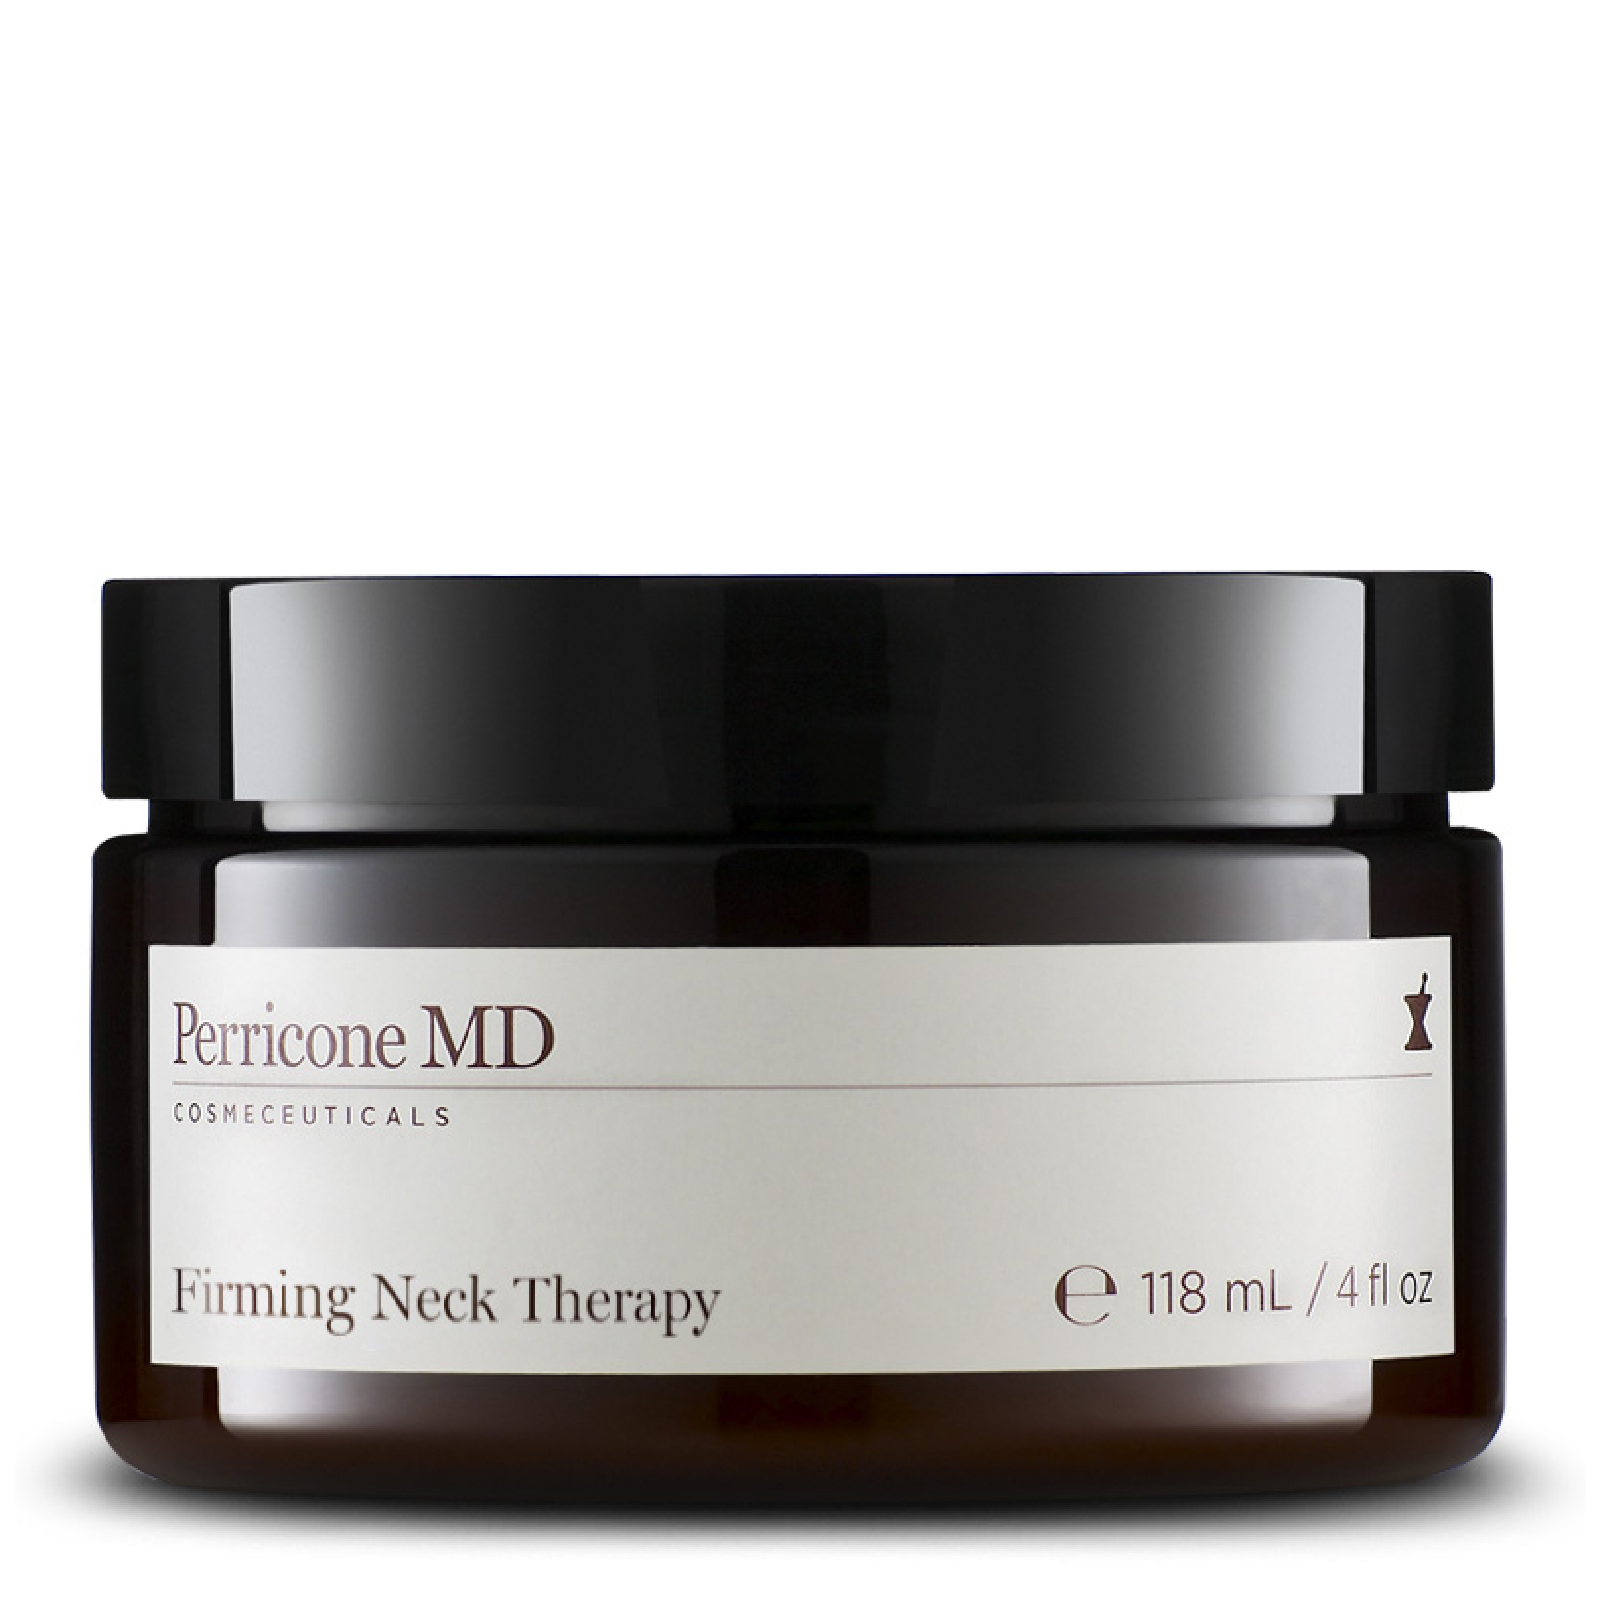 Perricone MD Firming Neck Therapy Supersize